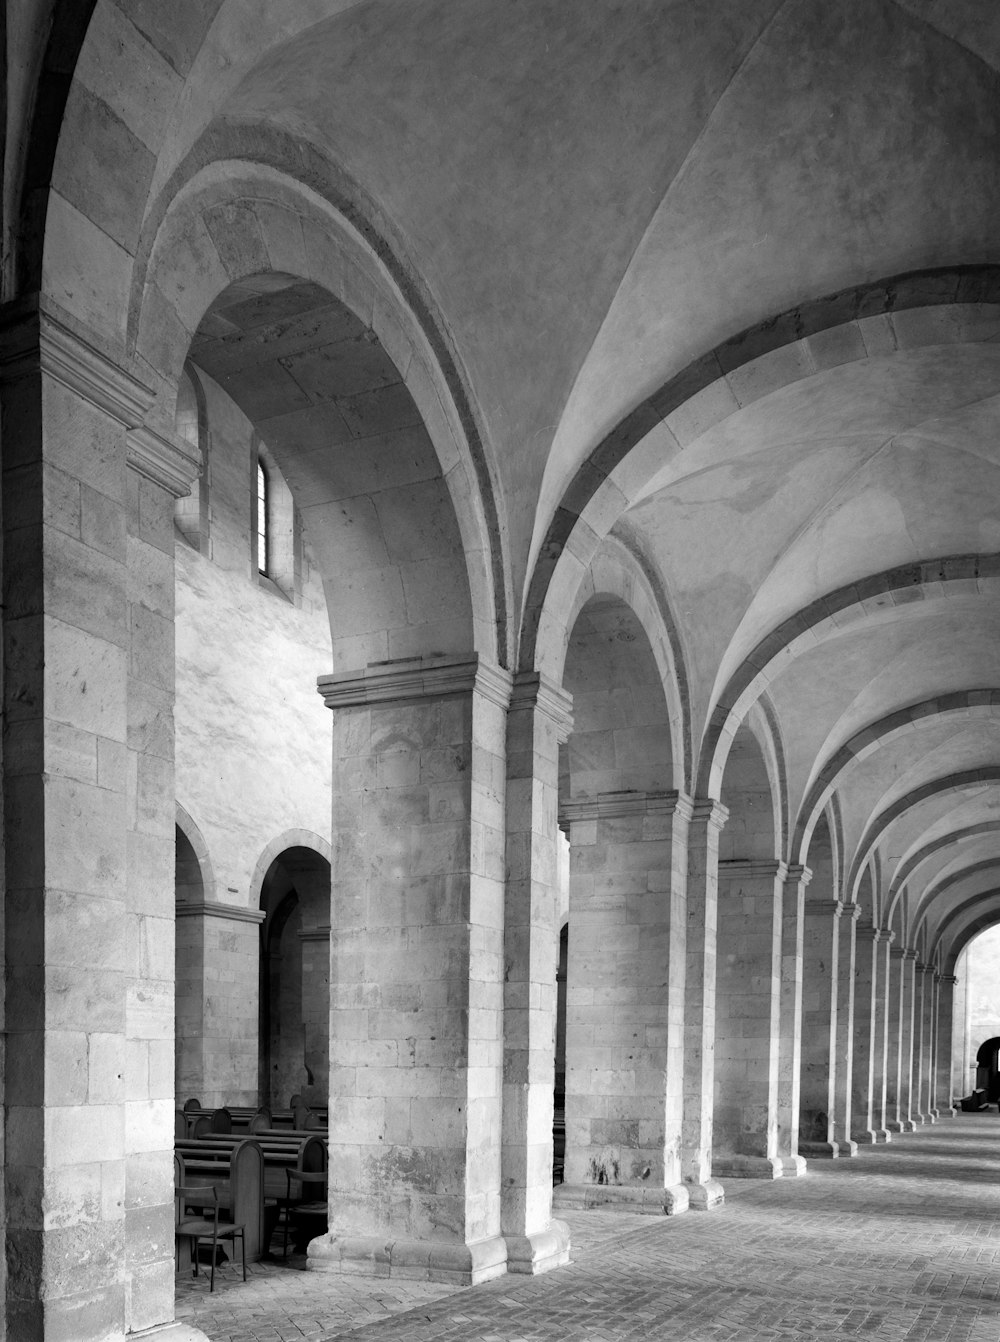 a black and white photo of a long hallway